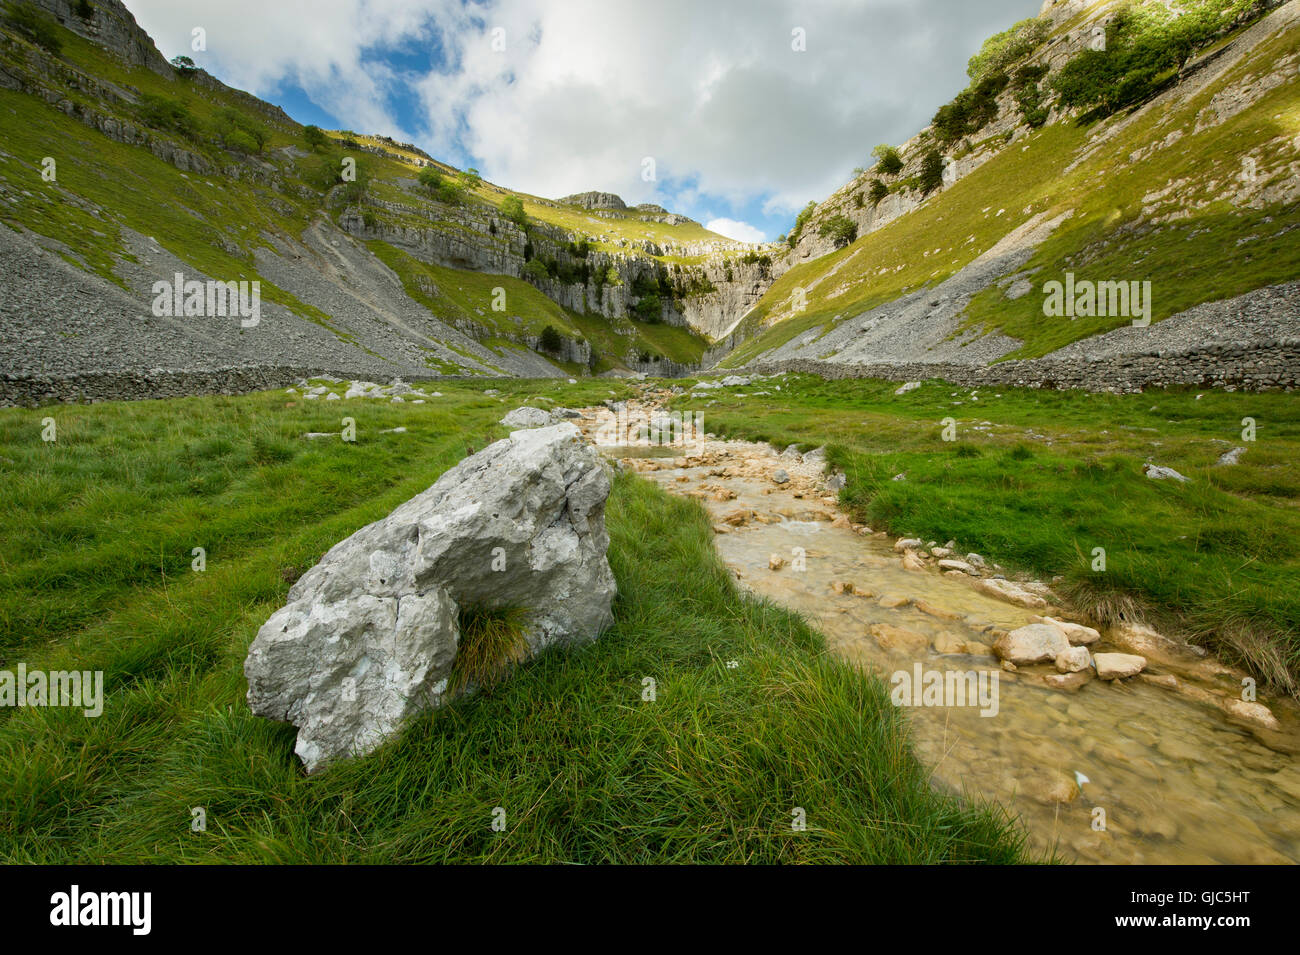 View of beck and steep-sided, limestone valley on the approach to Goredale Scar in the Yorkshire Dales National Park, England. Stock Photo